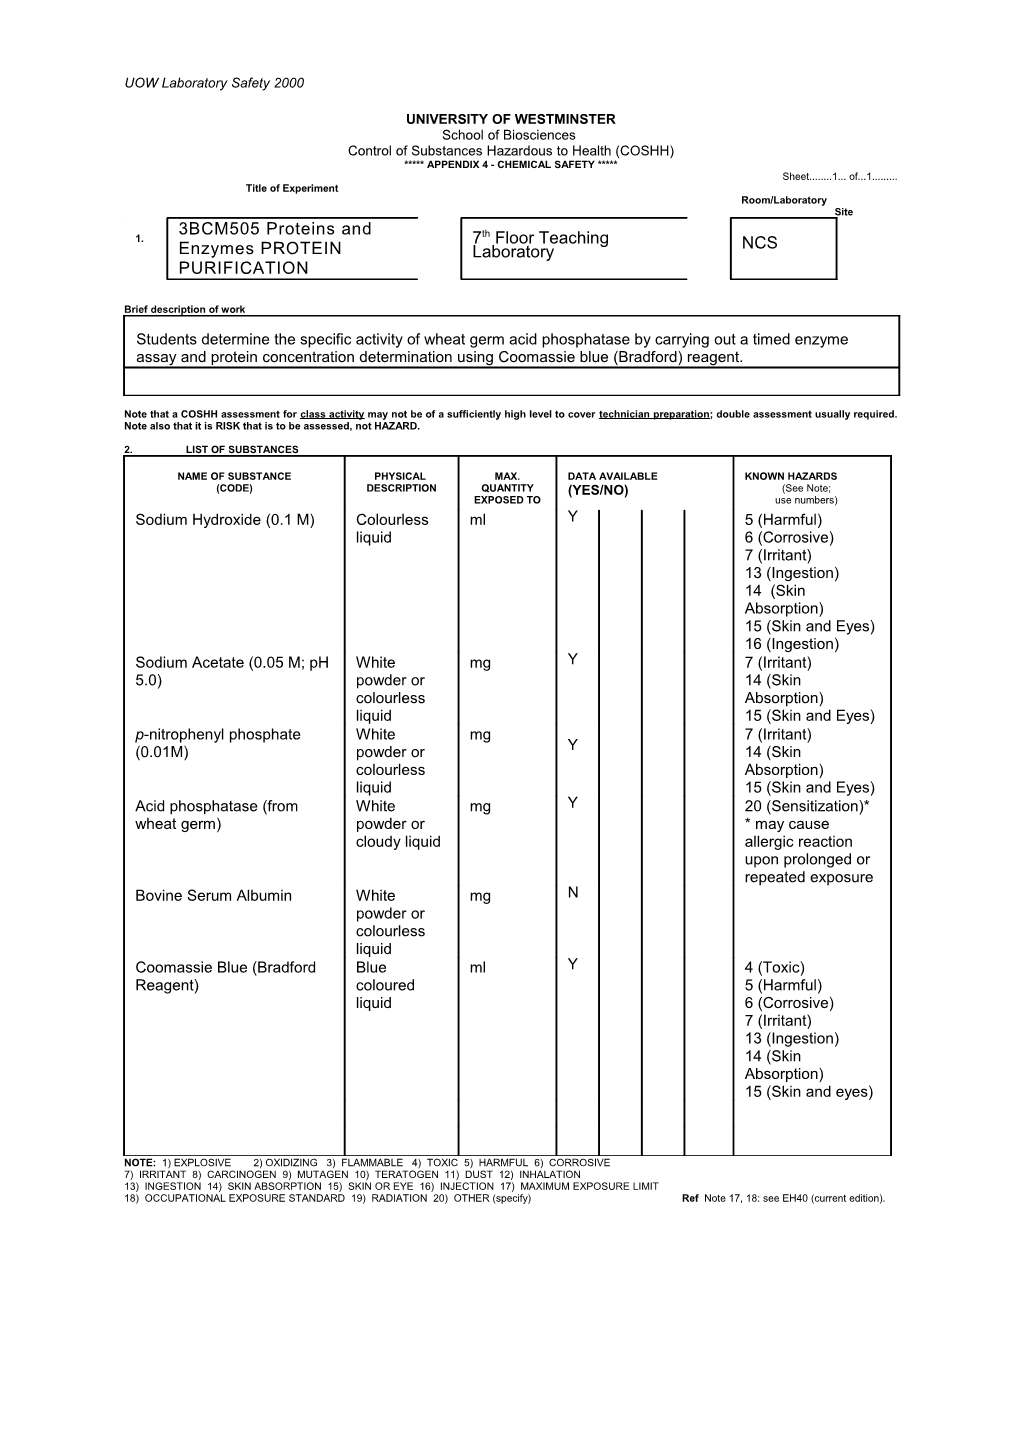 Chemical-COSHH Form